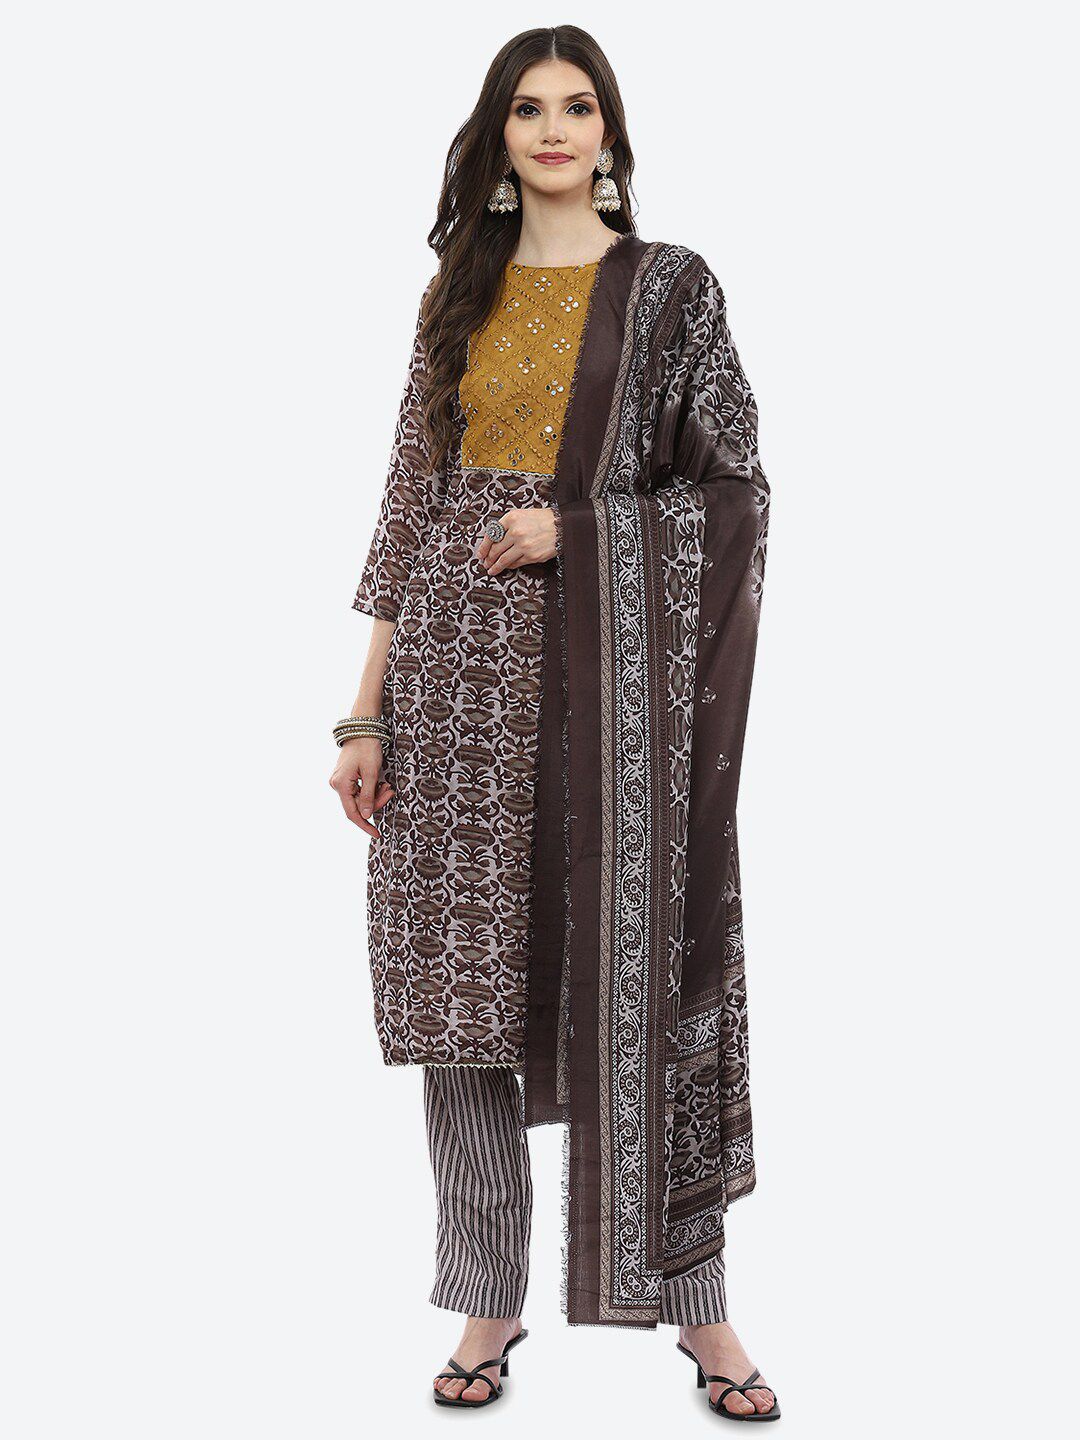 Biba Brown & Mustard Embellished Unstitched Dress Material Price in India